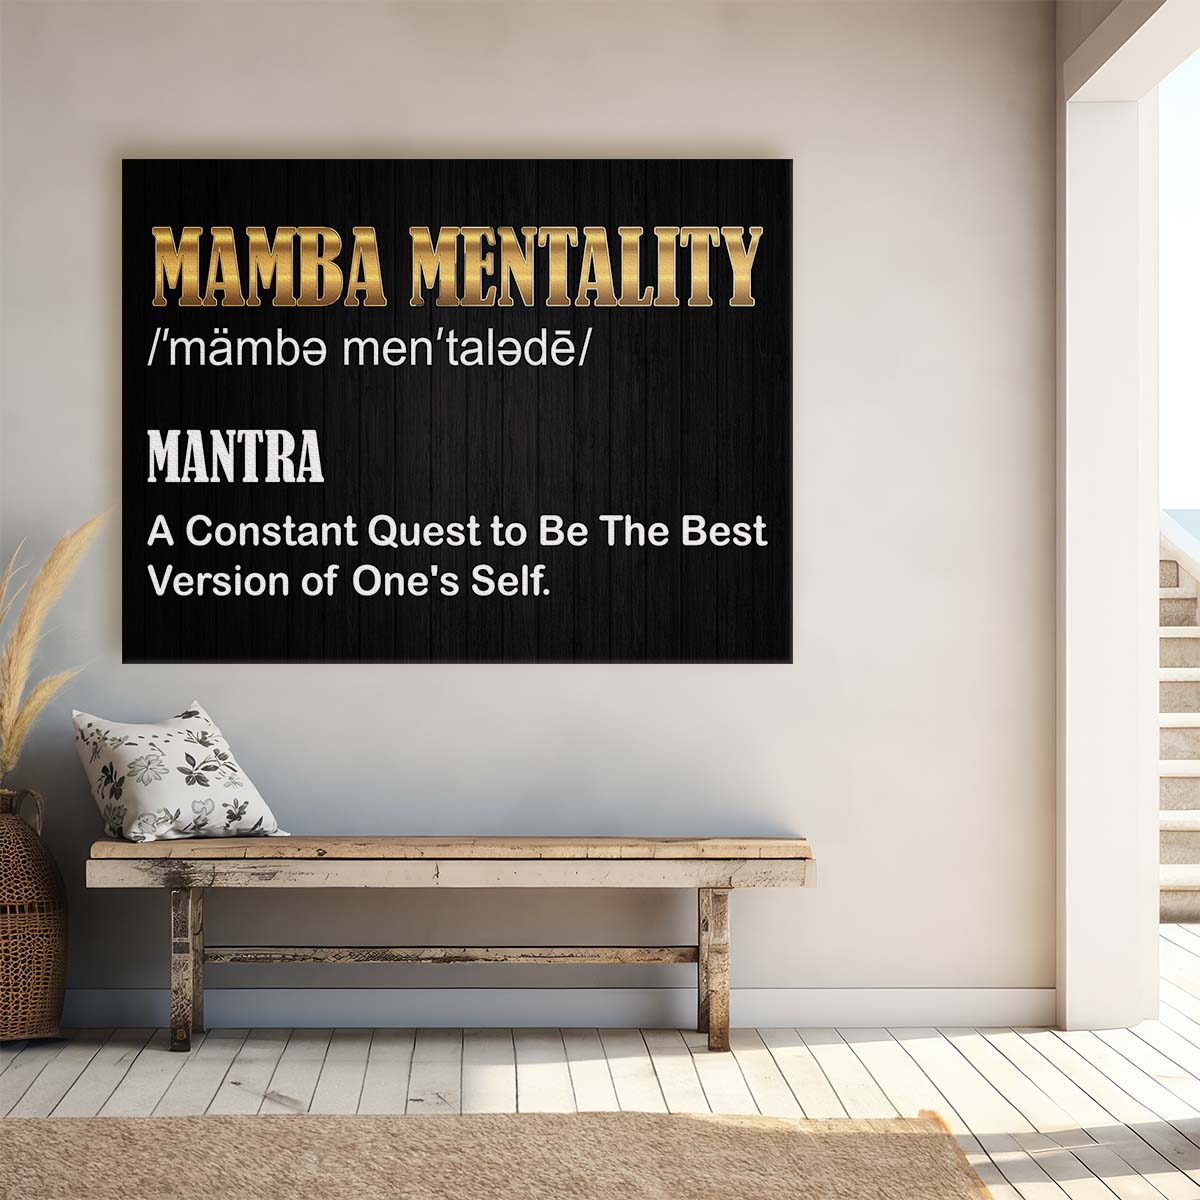 Kobe Bryant Mamba Mentality Be The Best Wall Art by Luxuriance Designs. Made in USA.